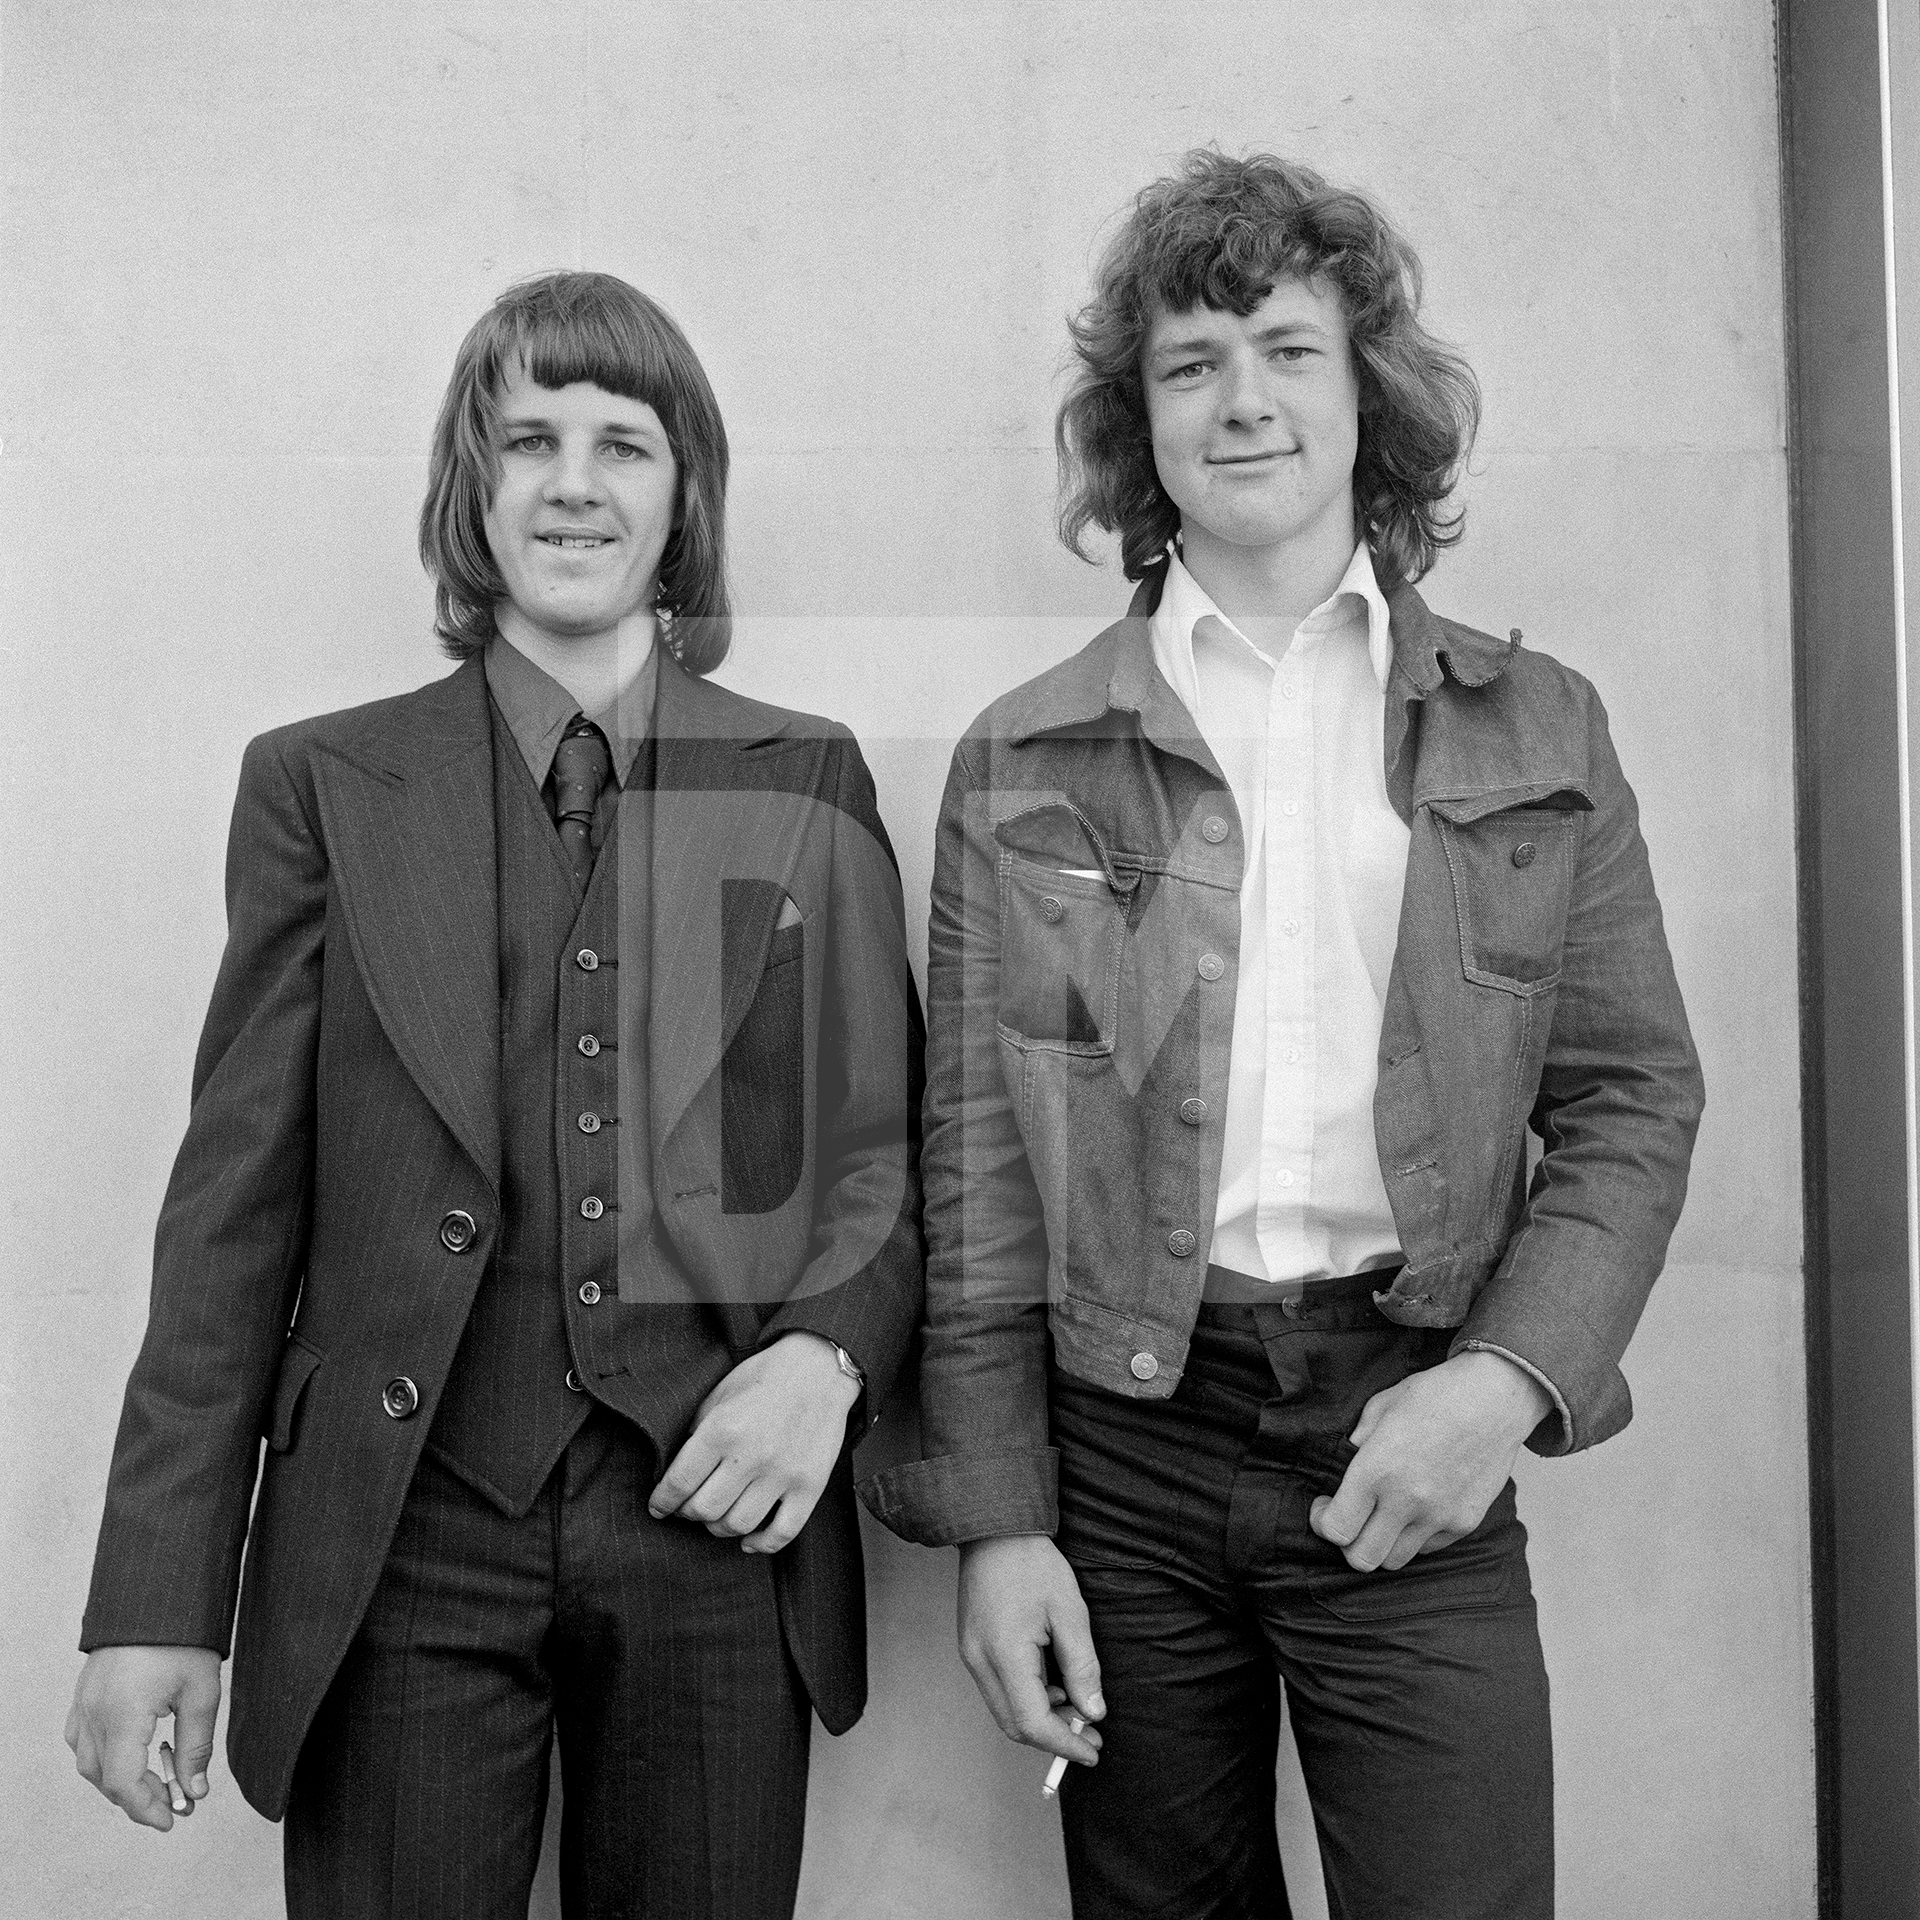 Left David Leigh, right Tommy Kemp, Southampton. May 1974 by Daniel Meadows